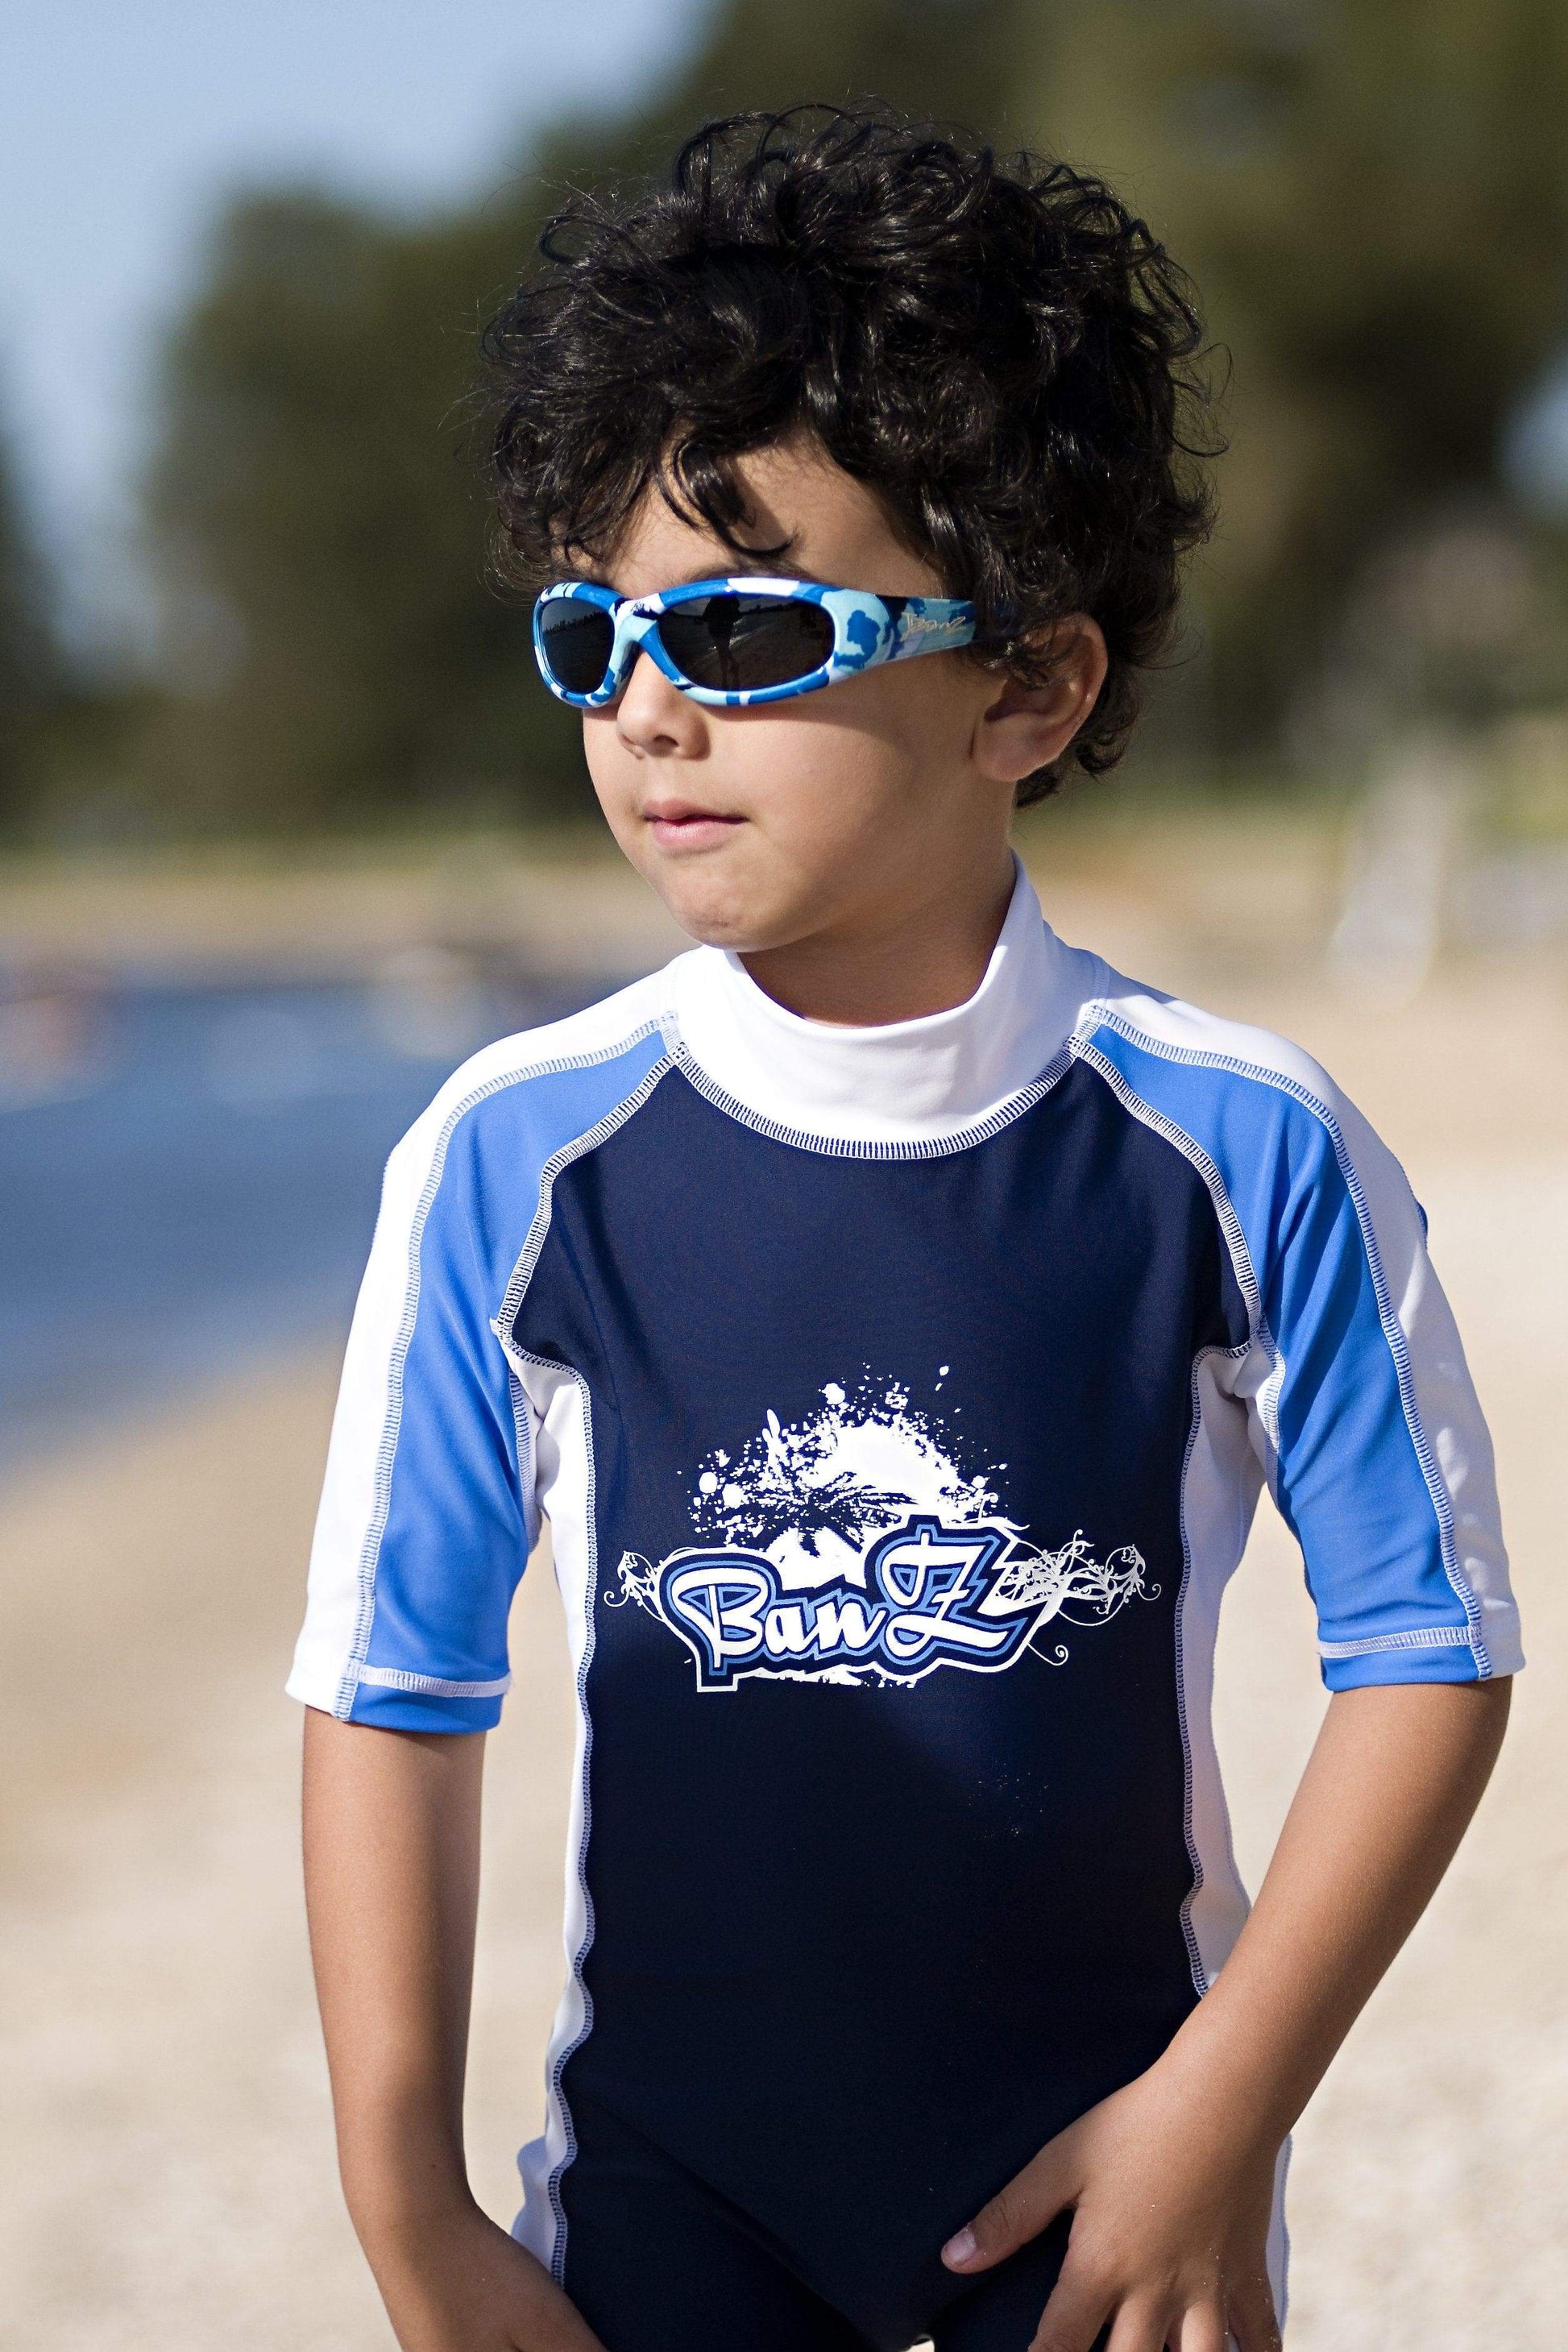 schoolaged child wears banz sunglasses and short sleeved rashtop while at beach